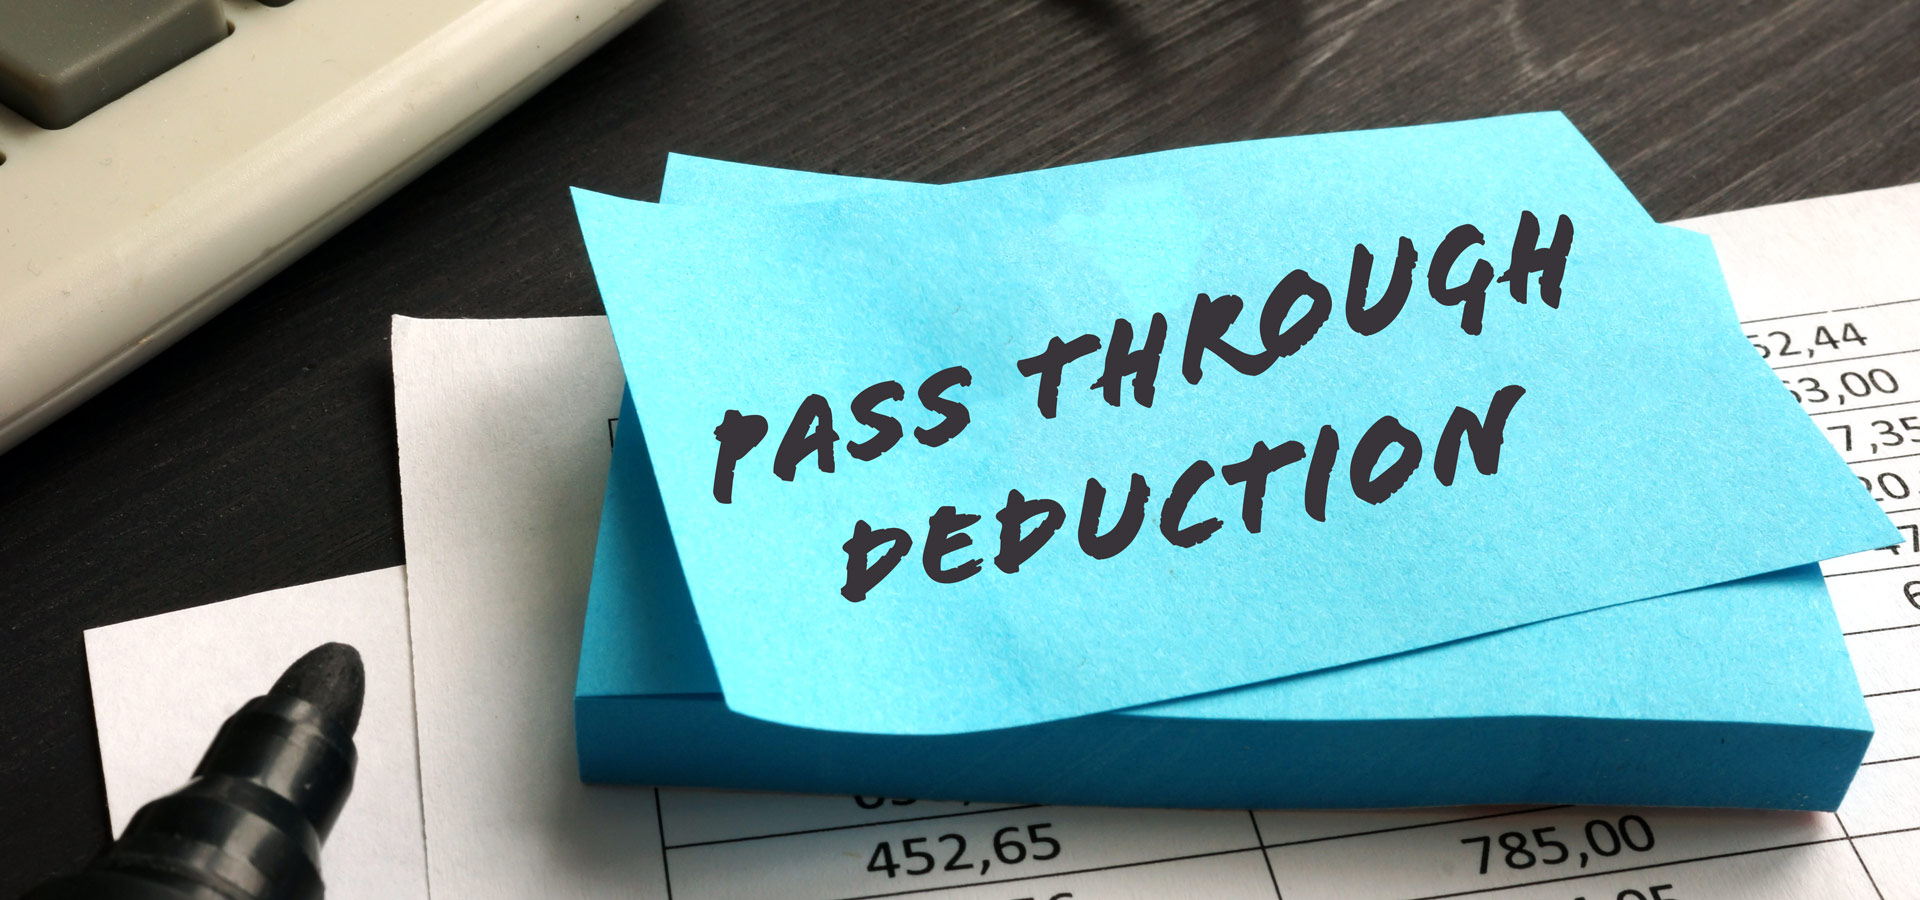 10 facts about the passthrough deduction for qualified business